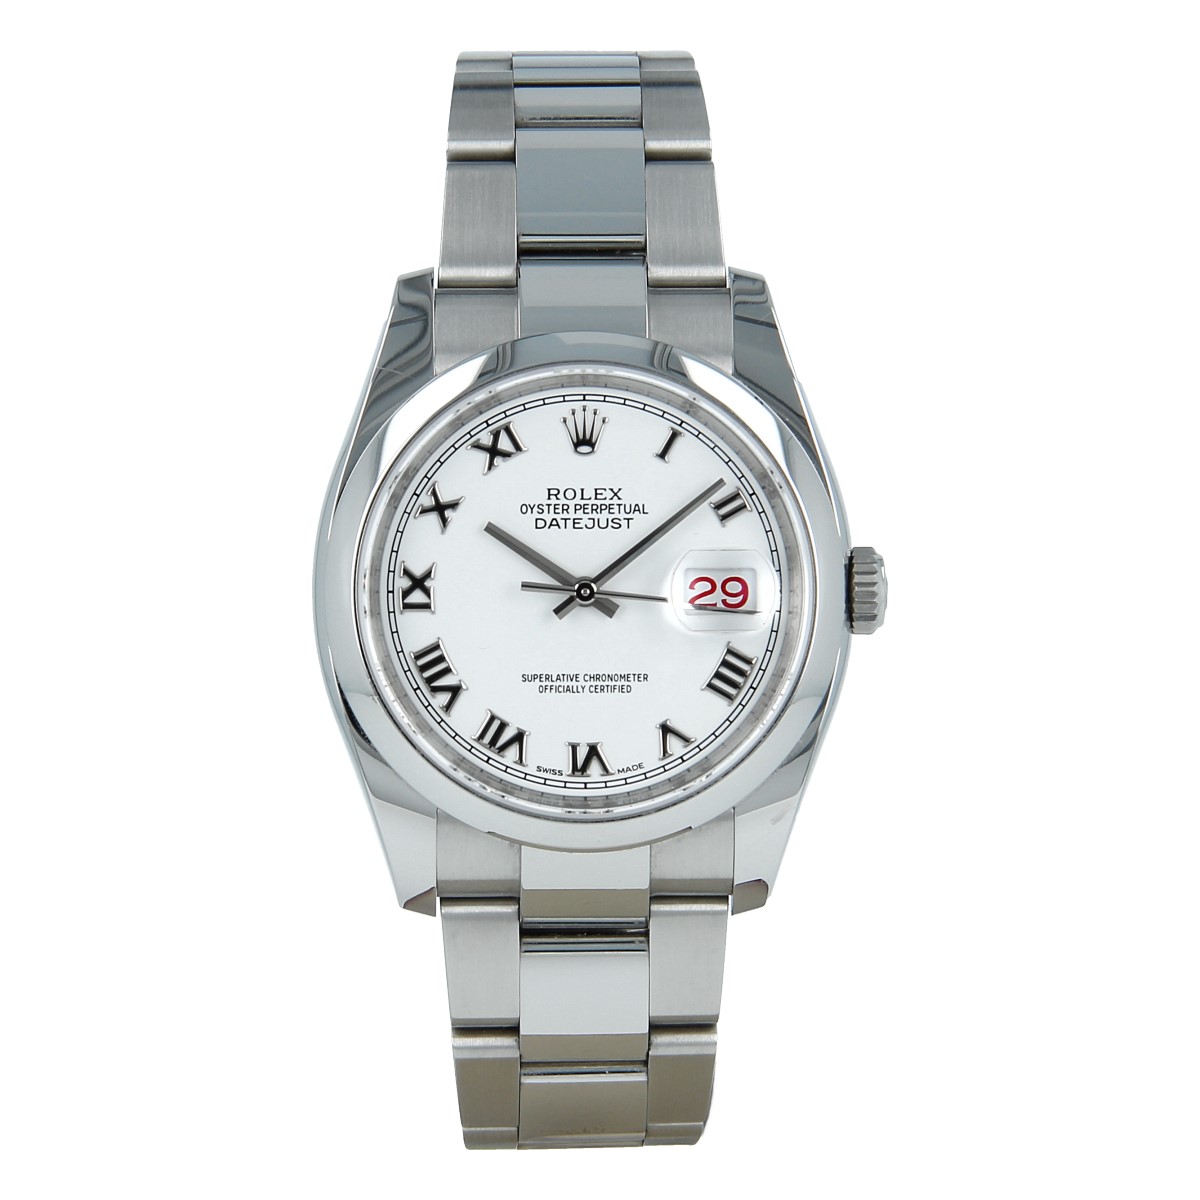 Rolex Datejust 36mm 116200 White Dial 